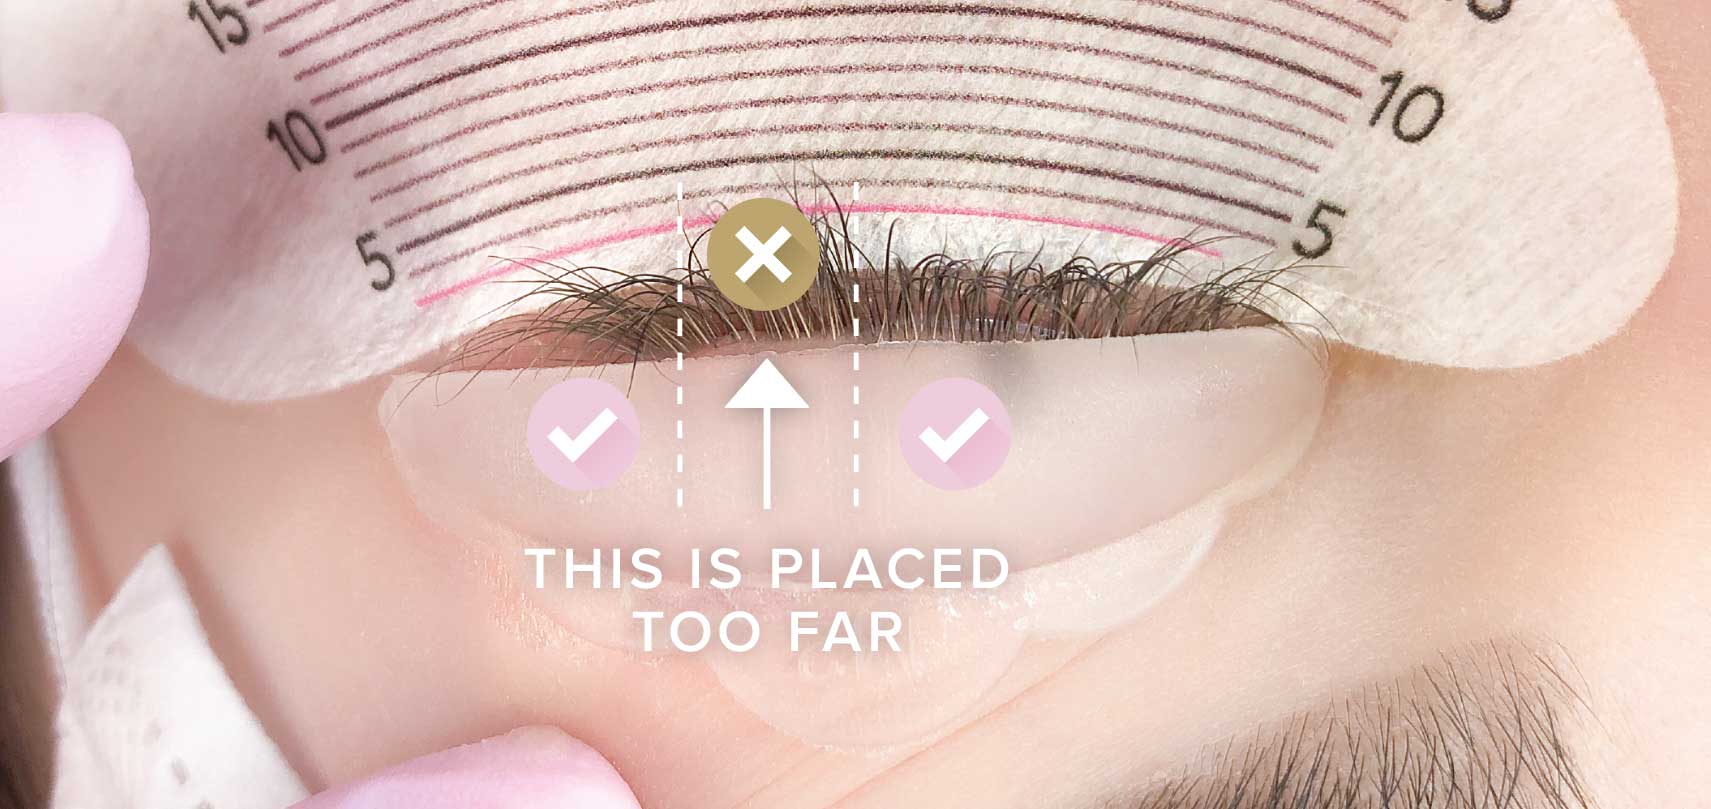 Step by Step Guide to Lifting Lashes is an educational blog post